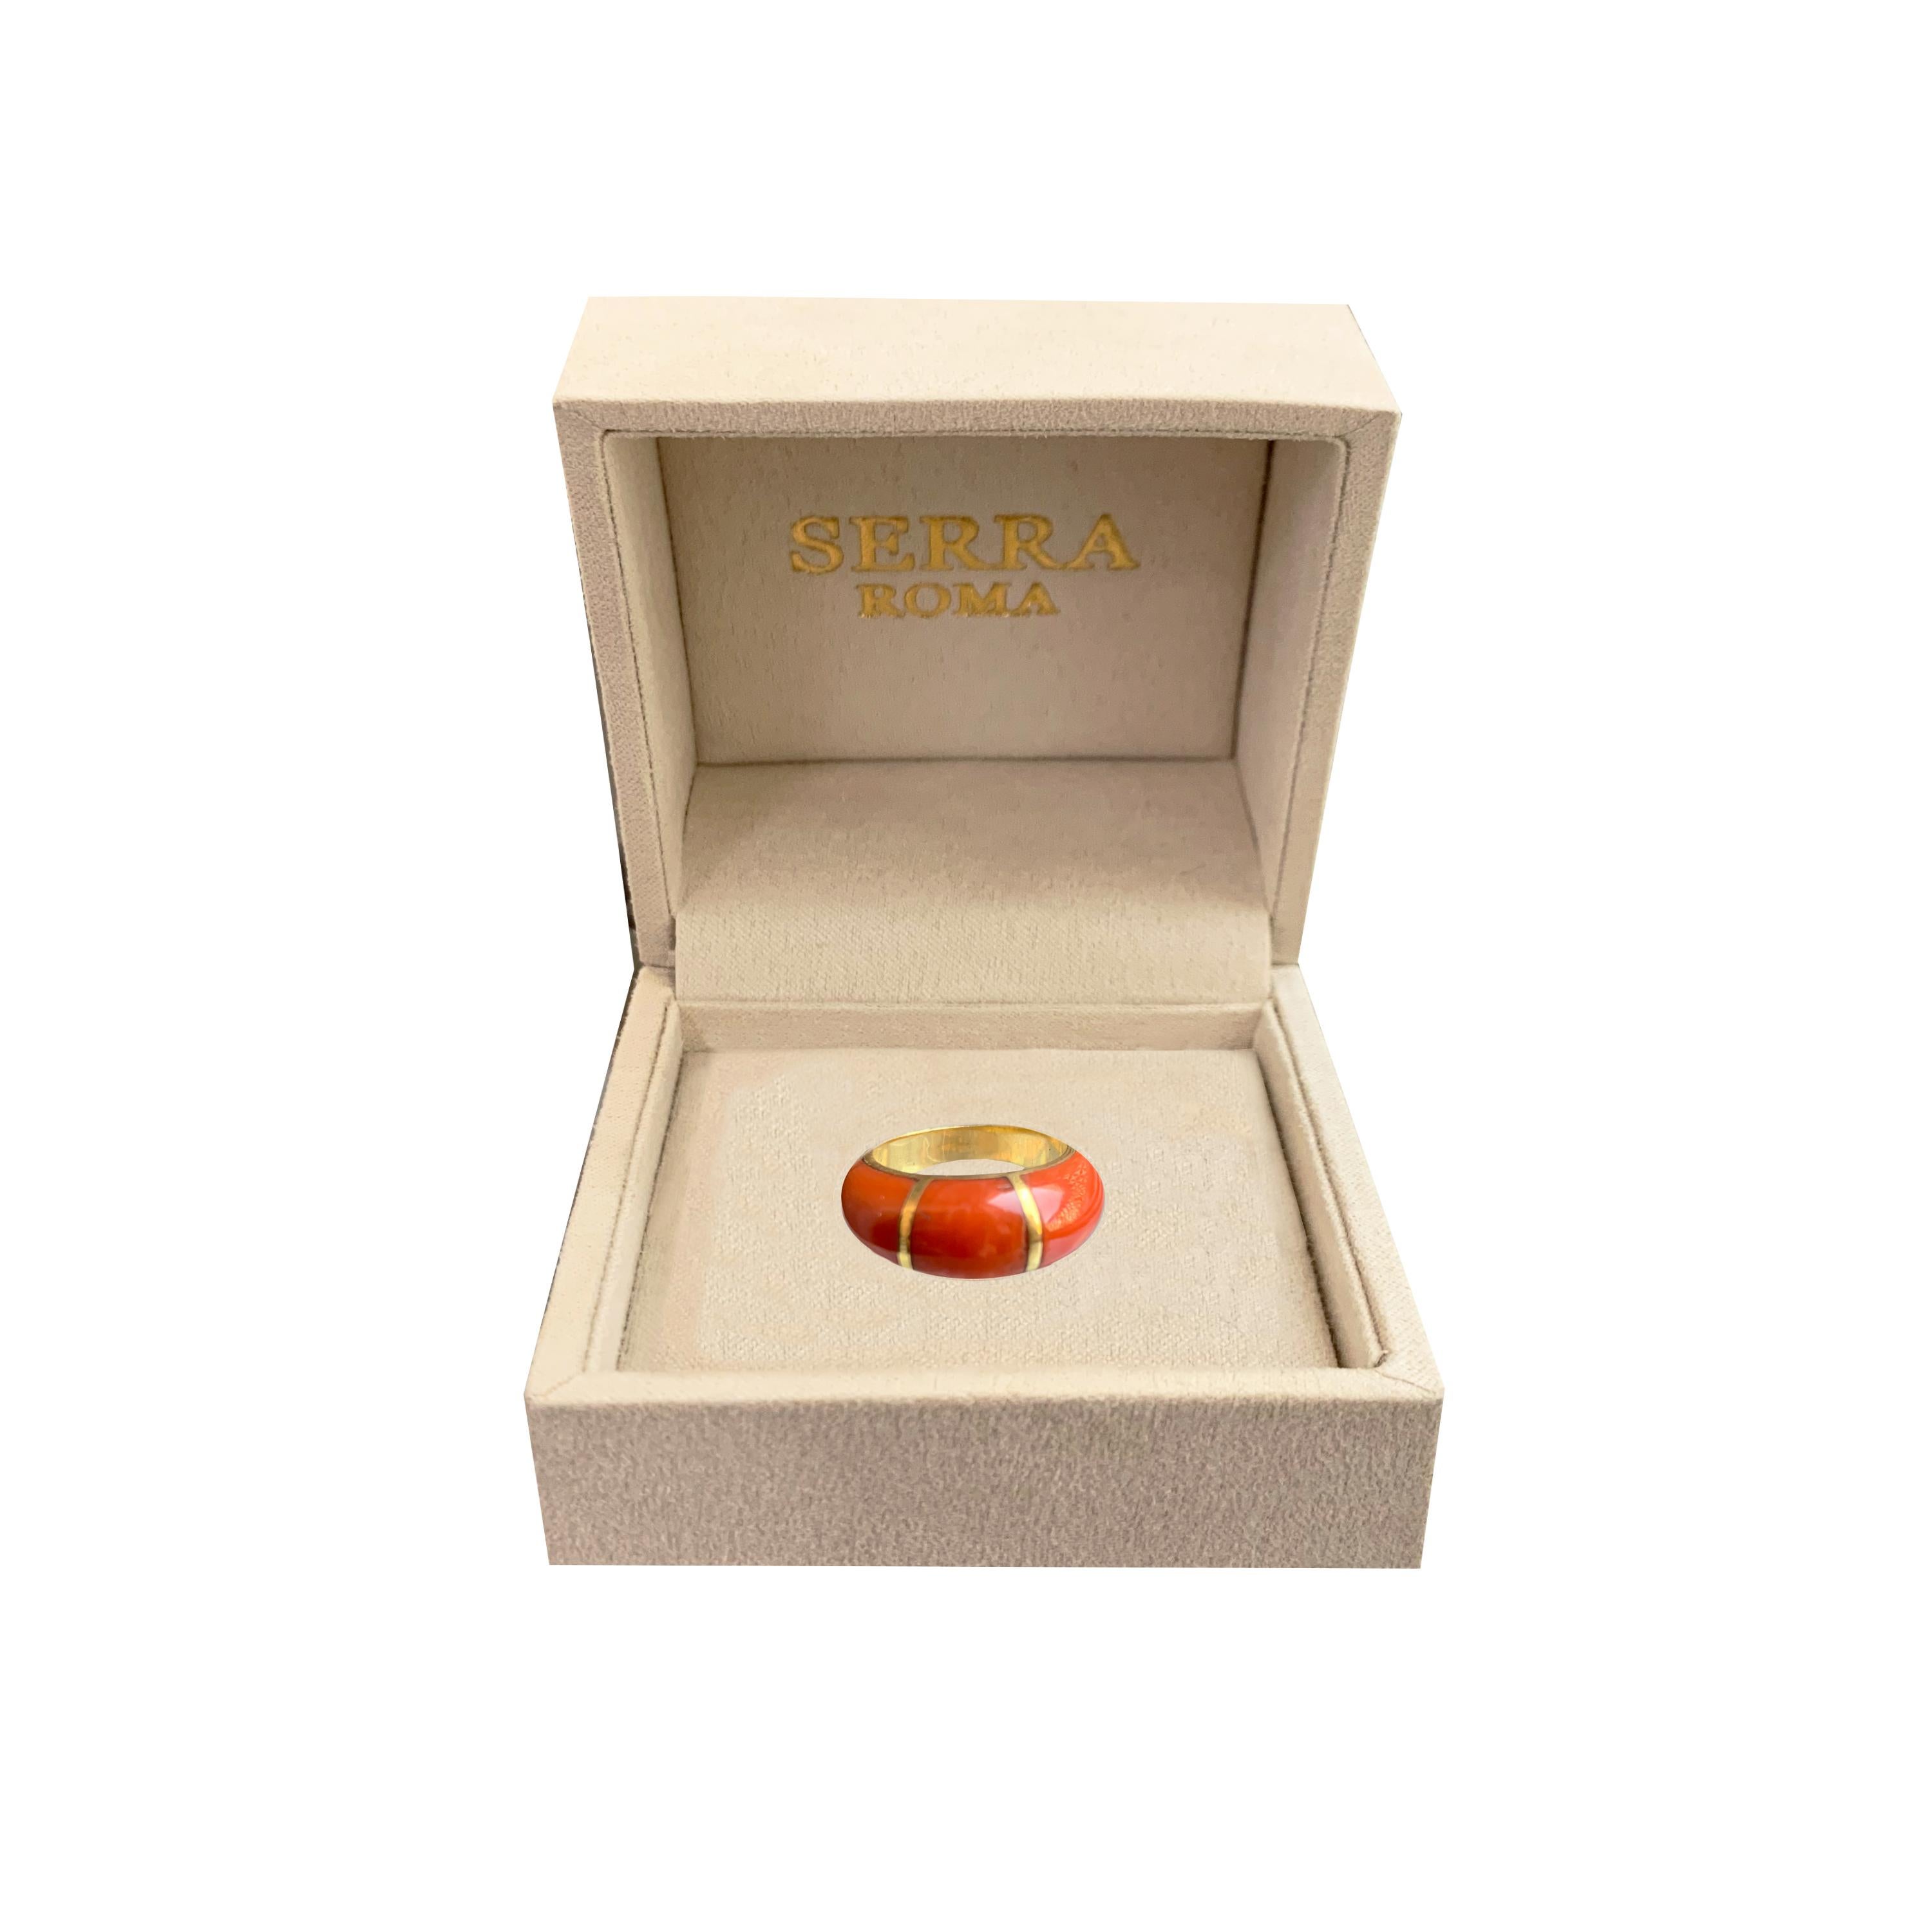 This Italian red coral 18 Kt gold bands ring has a classic but very current design. It was handmade by skilled Italian craftsmen.
Finger size : 5. 3/4 
Weigth : 8.20 gr